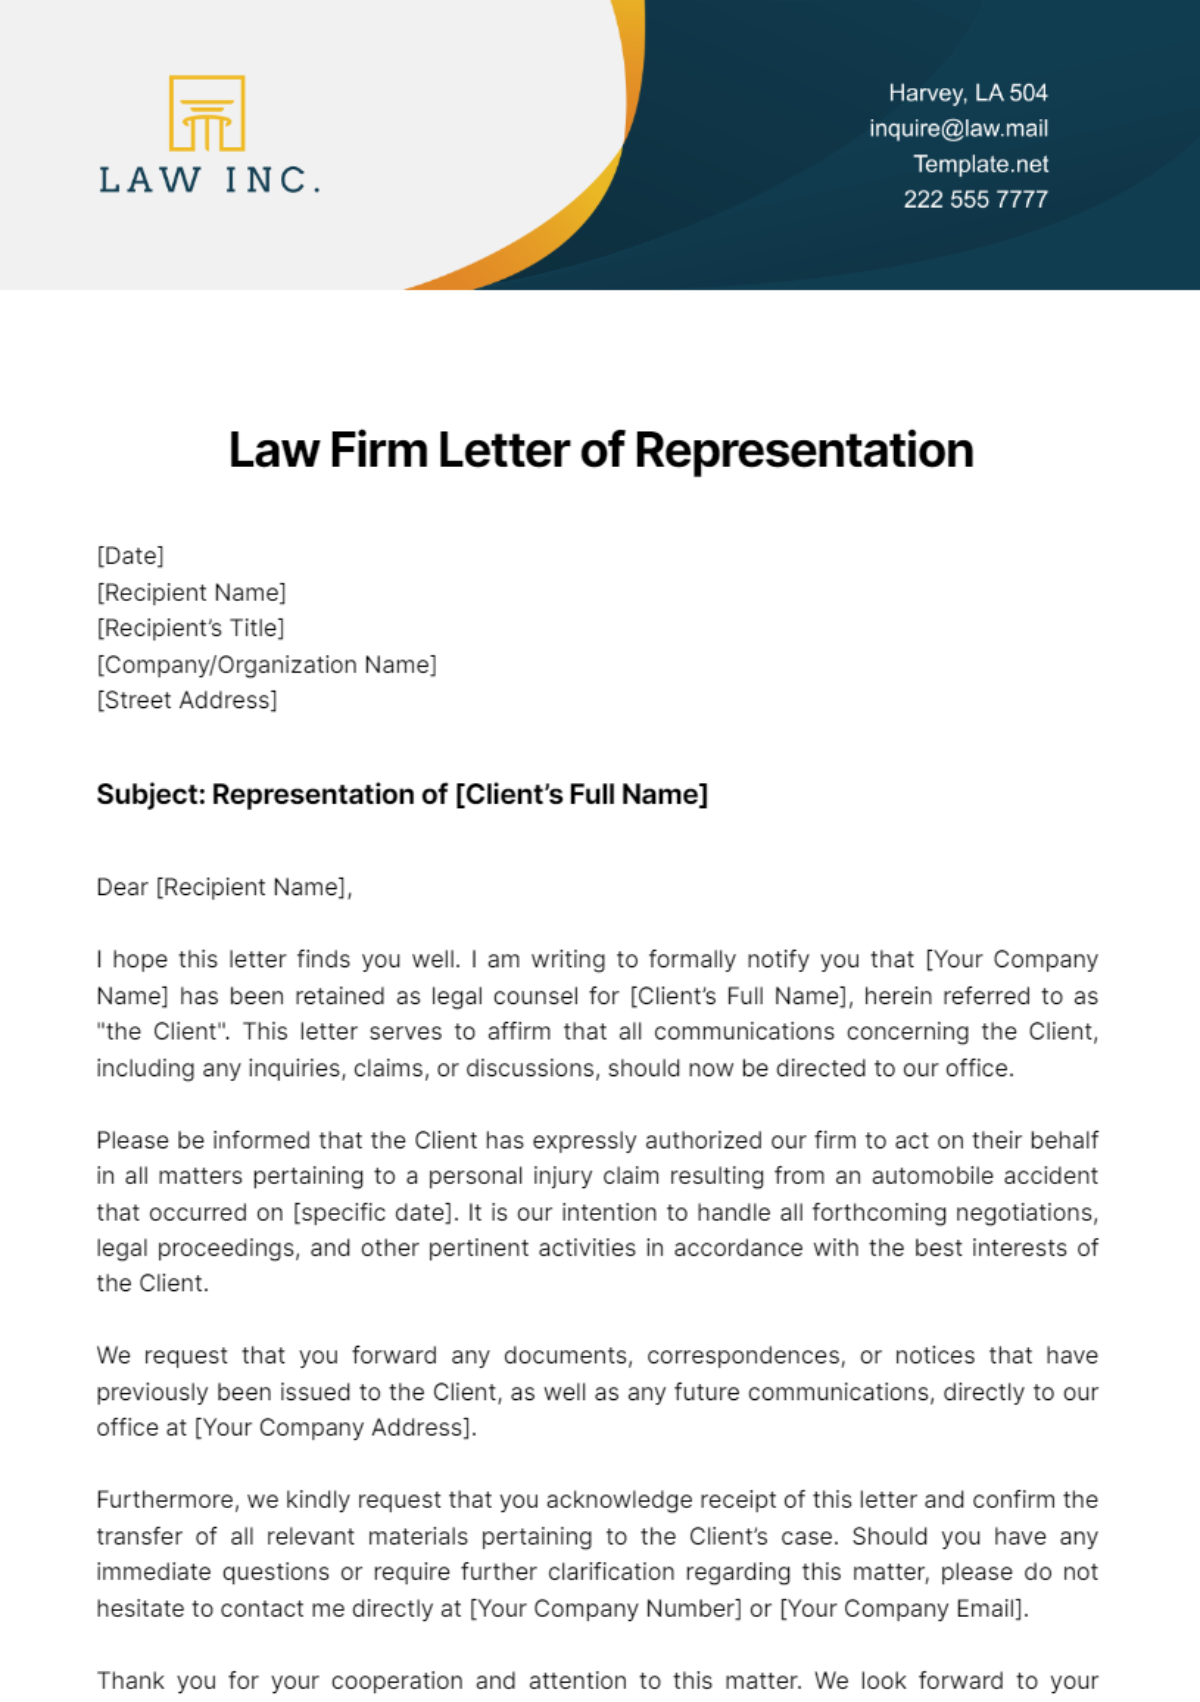 Law Firm Letter of Representation Template